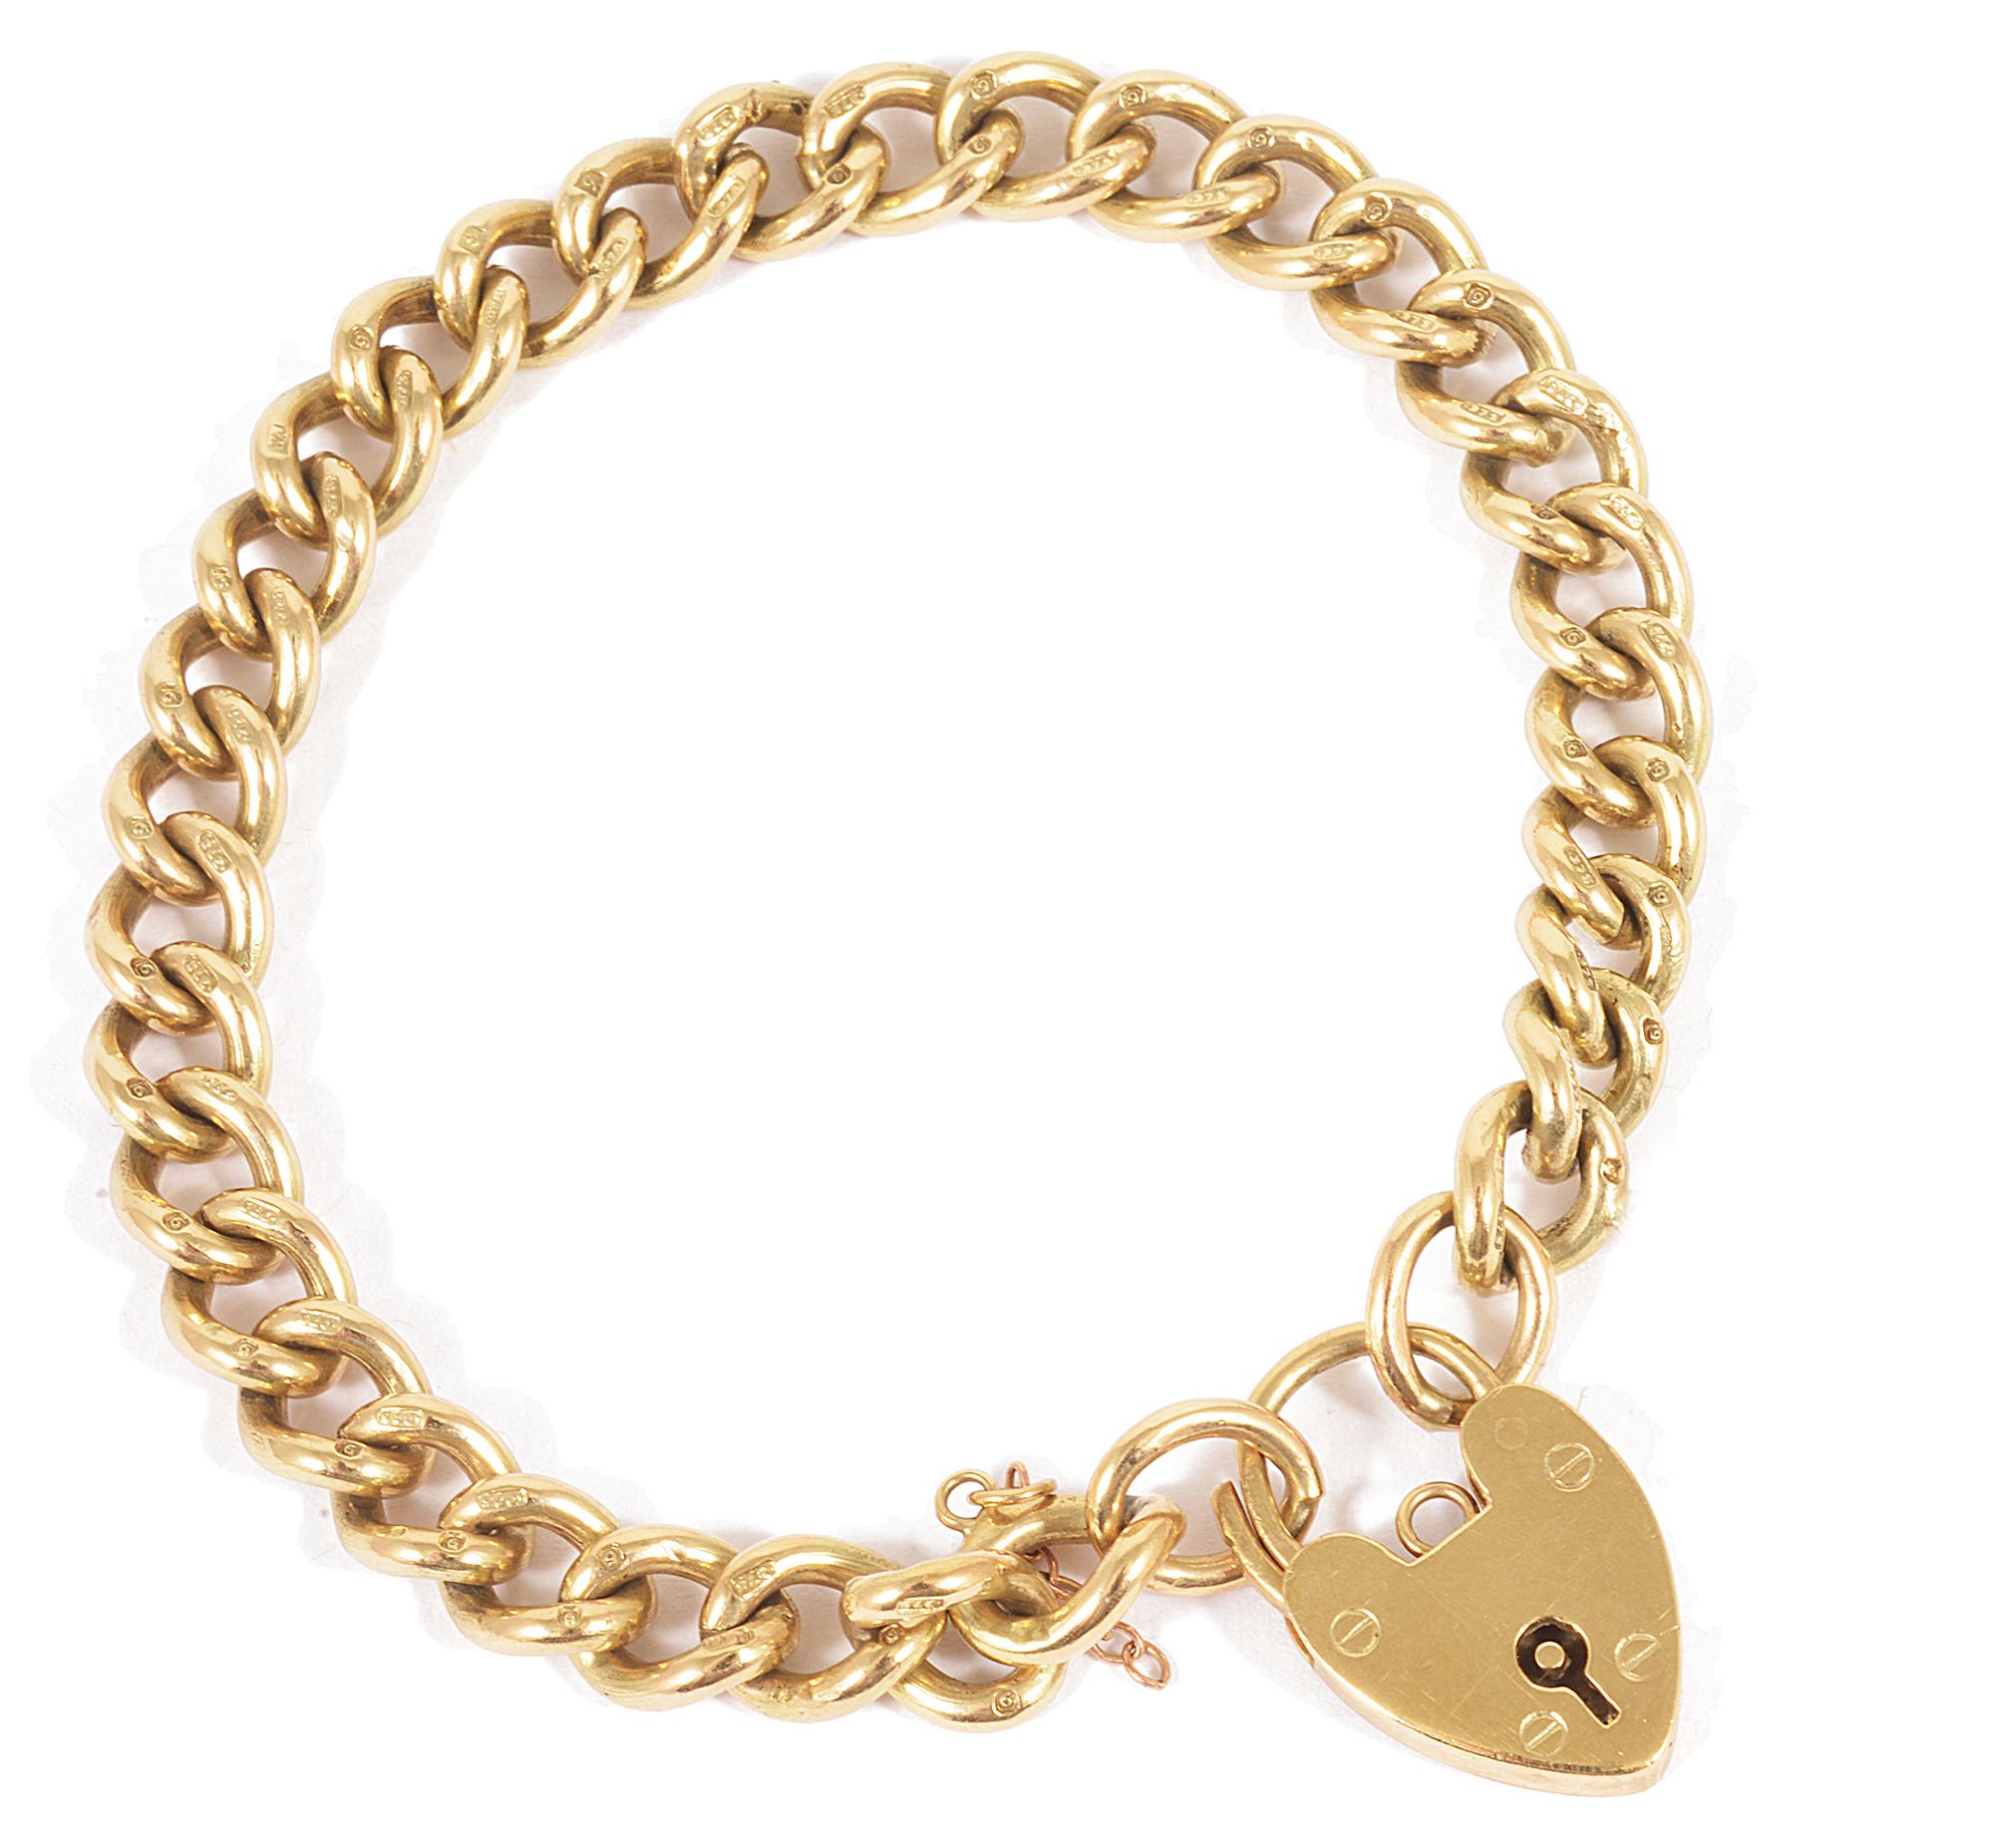 A 9ct gold curb link bracelet with heart padlock fasteningmarked 9 to each bracelet linkapprox.